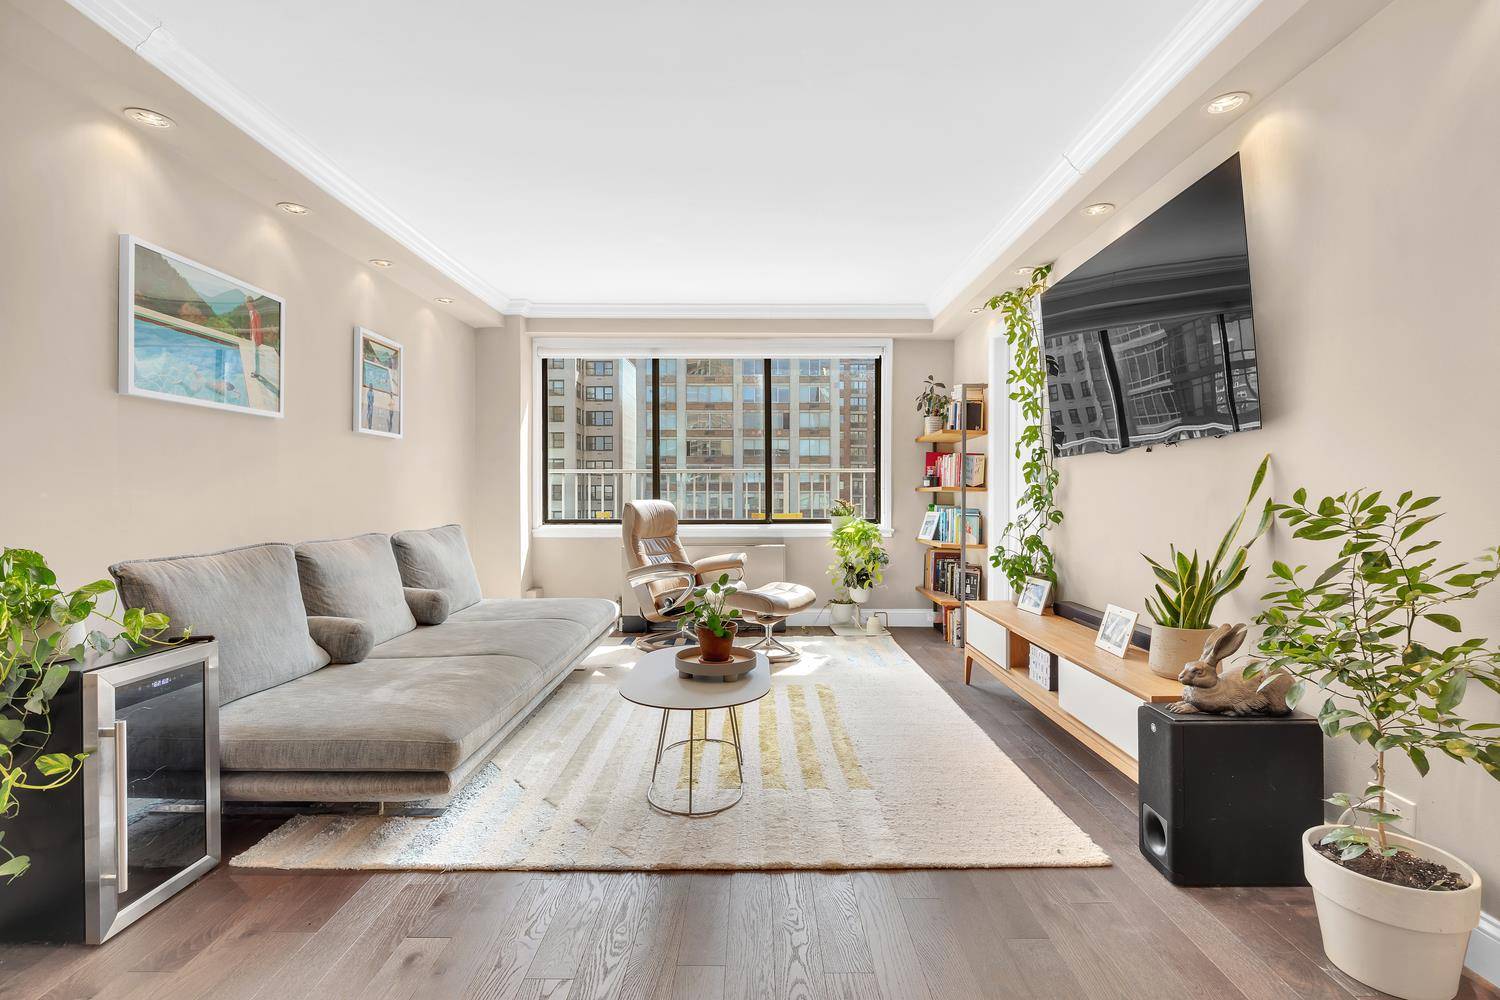 The top floor apartment at 345 East 73rd Street, Penthouse E, offers a sun filled living space with an abundance of natural light and space.